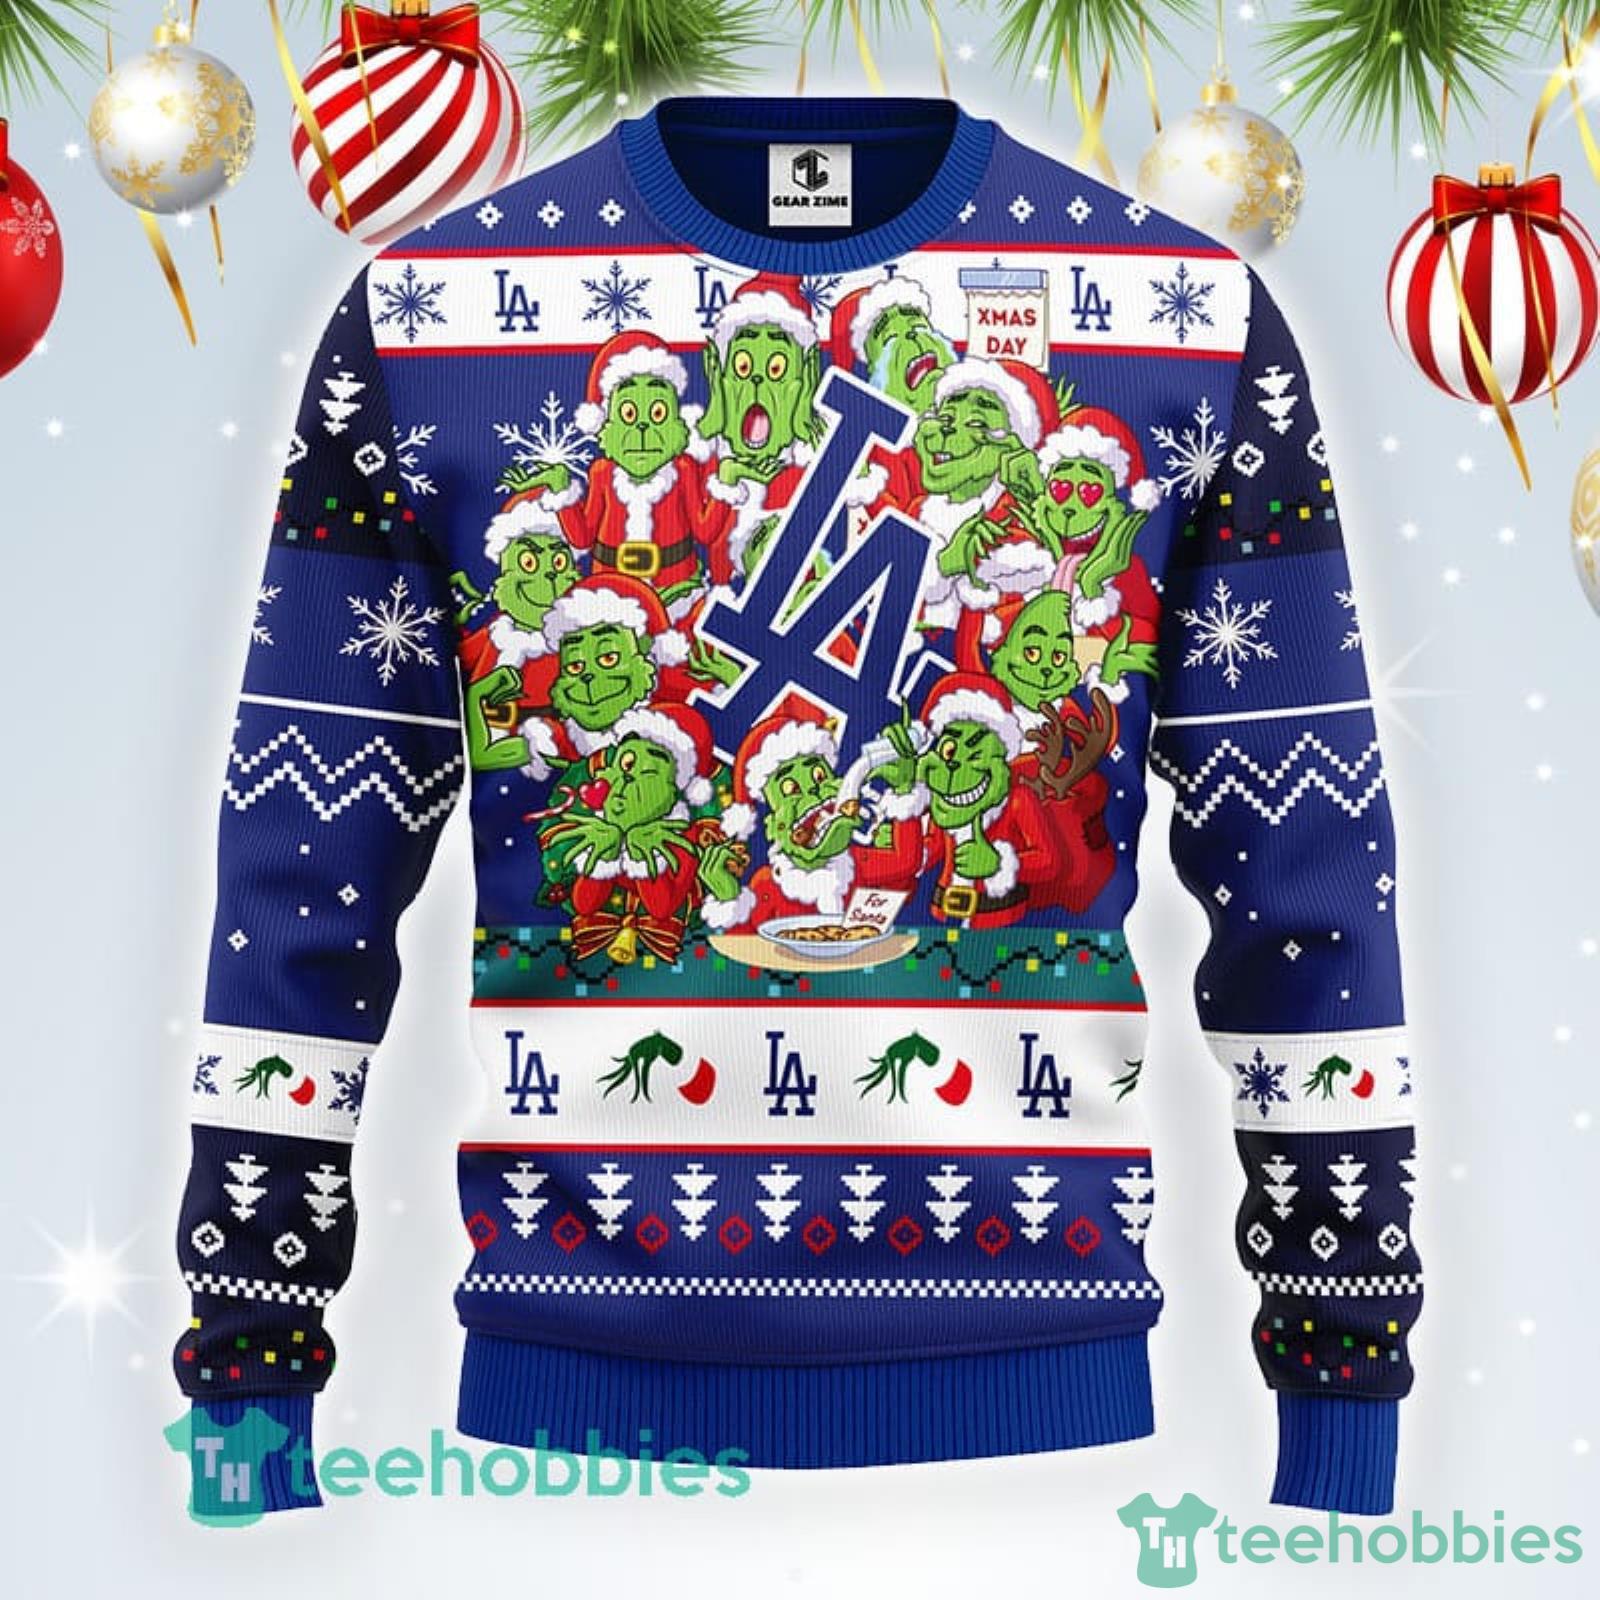 Snoopy Love Los Angeles Dodgers Ugly Christmas Sweater - Freedomdesign